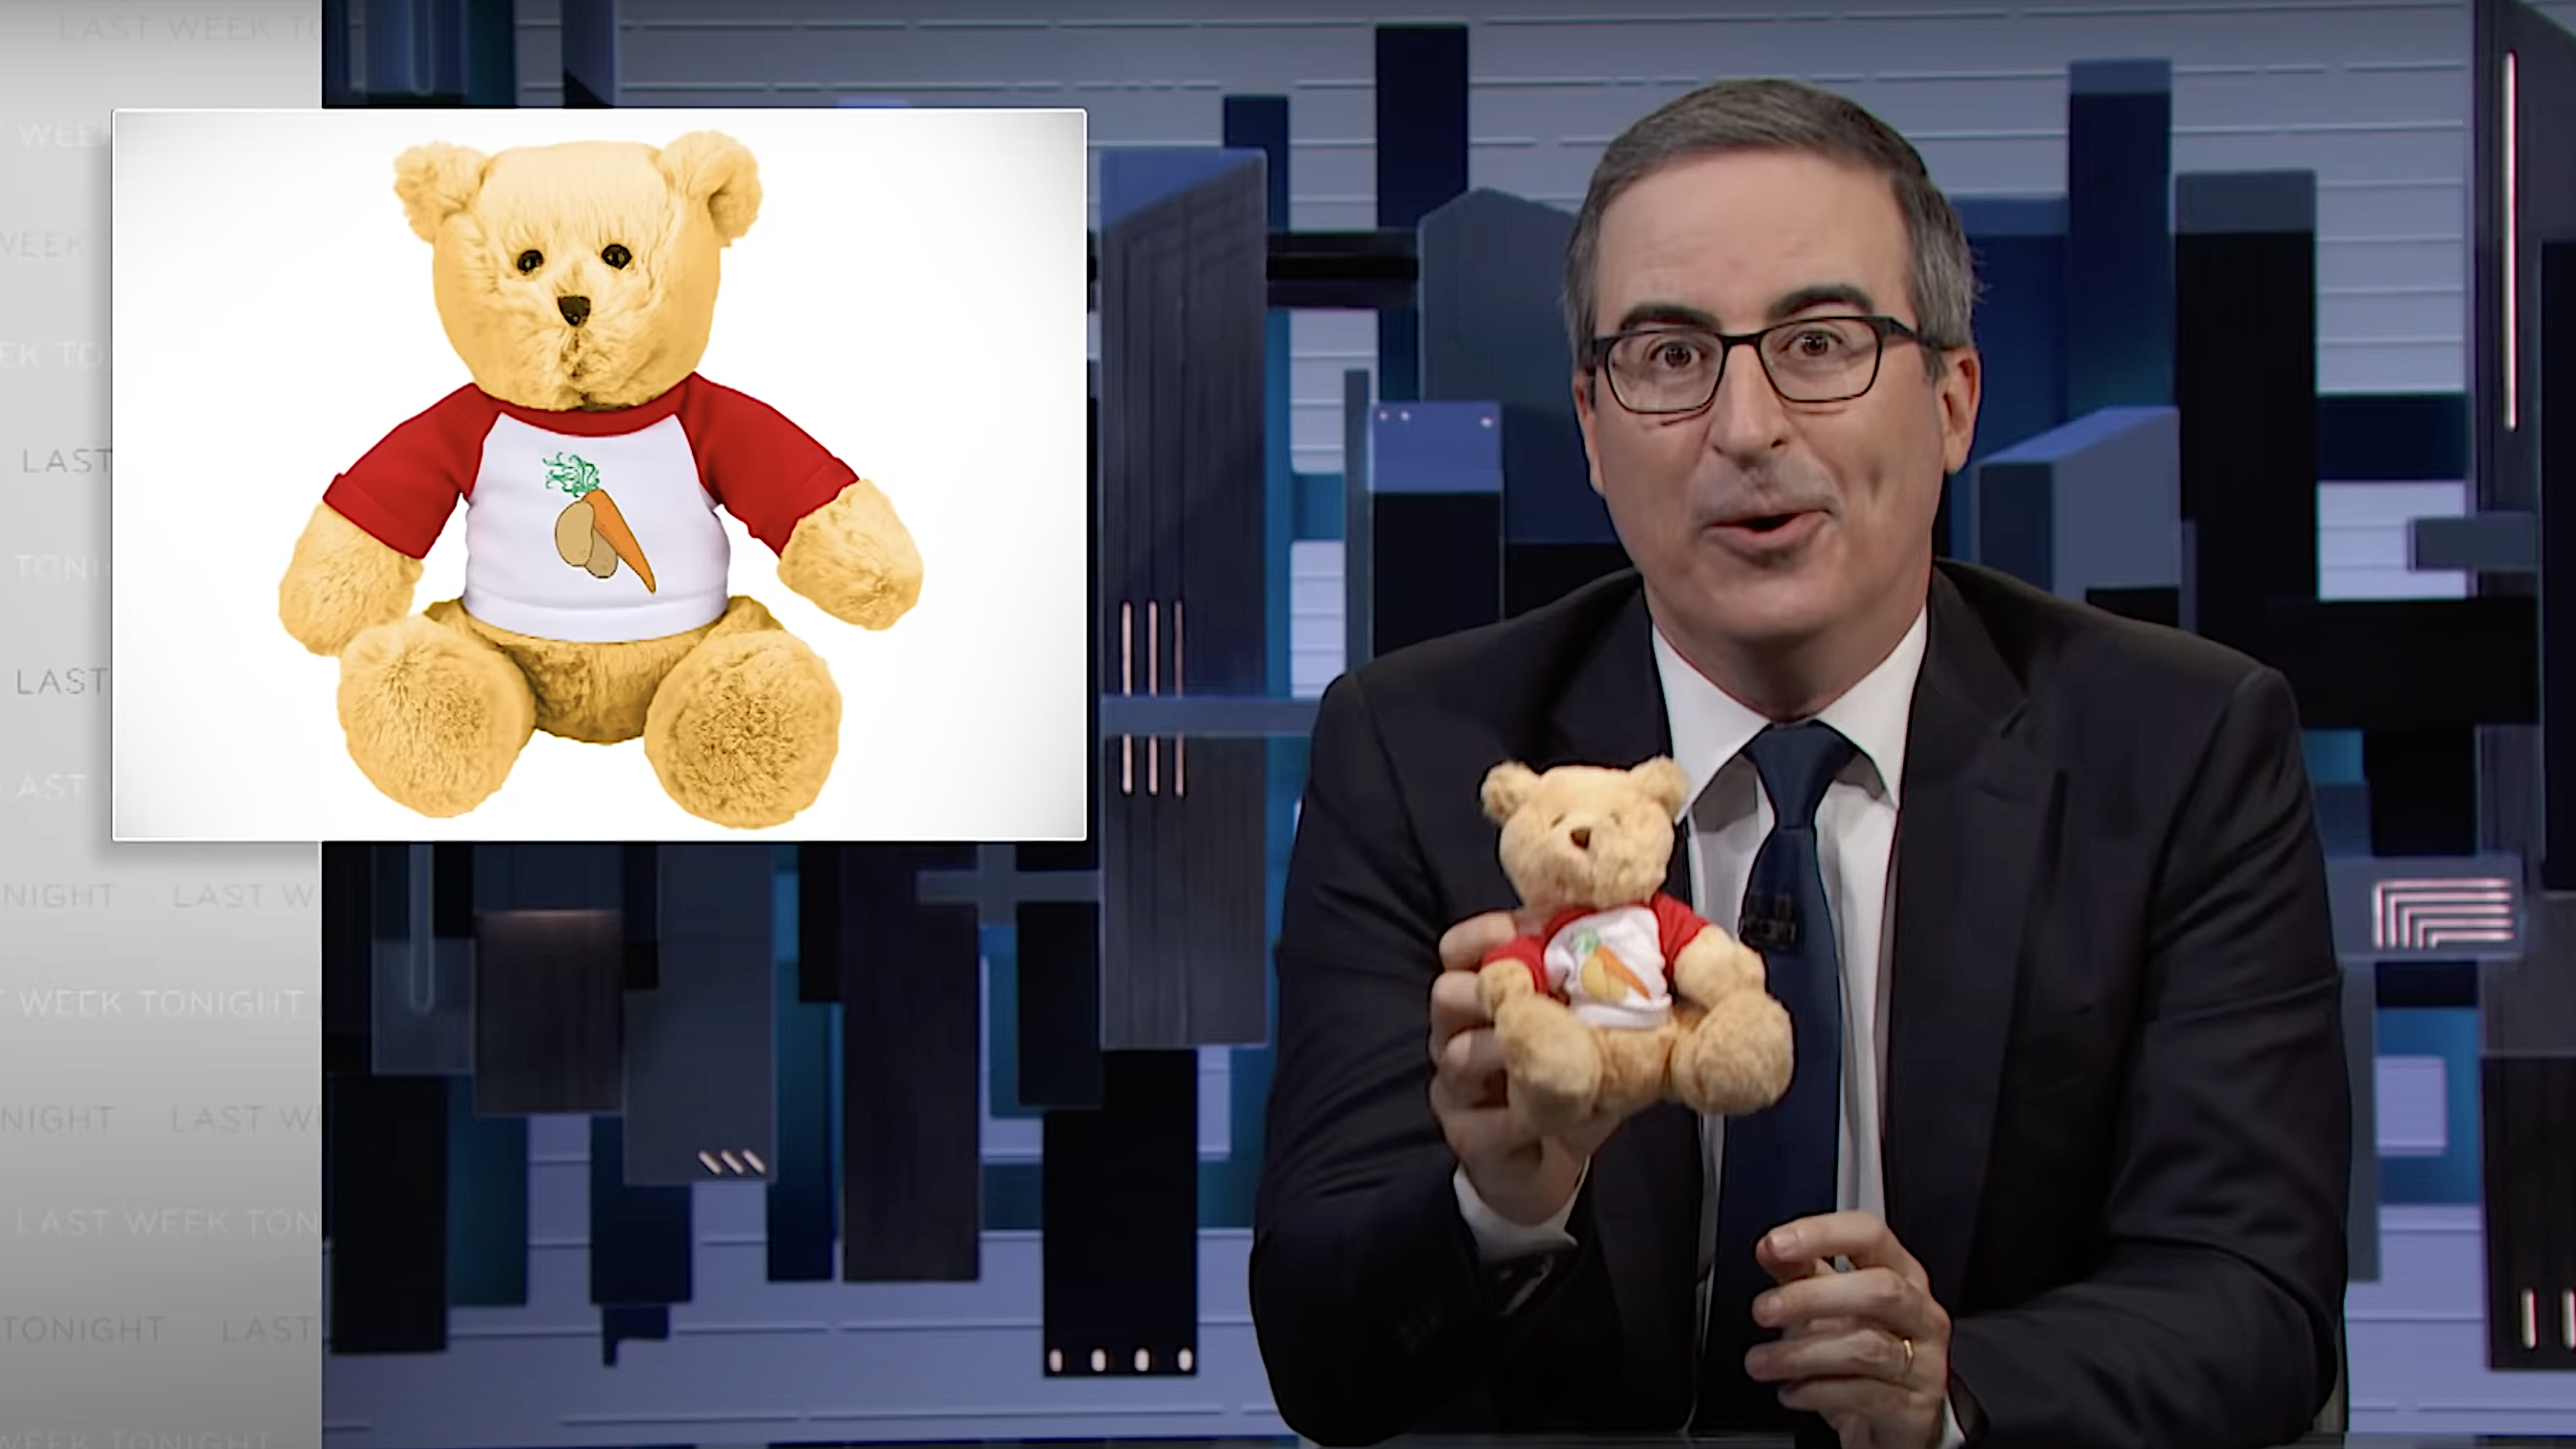 John Oliver rains mockery and teddy bears on Belarus’ vain, touchy, hair-obsessed dictator